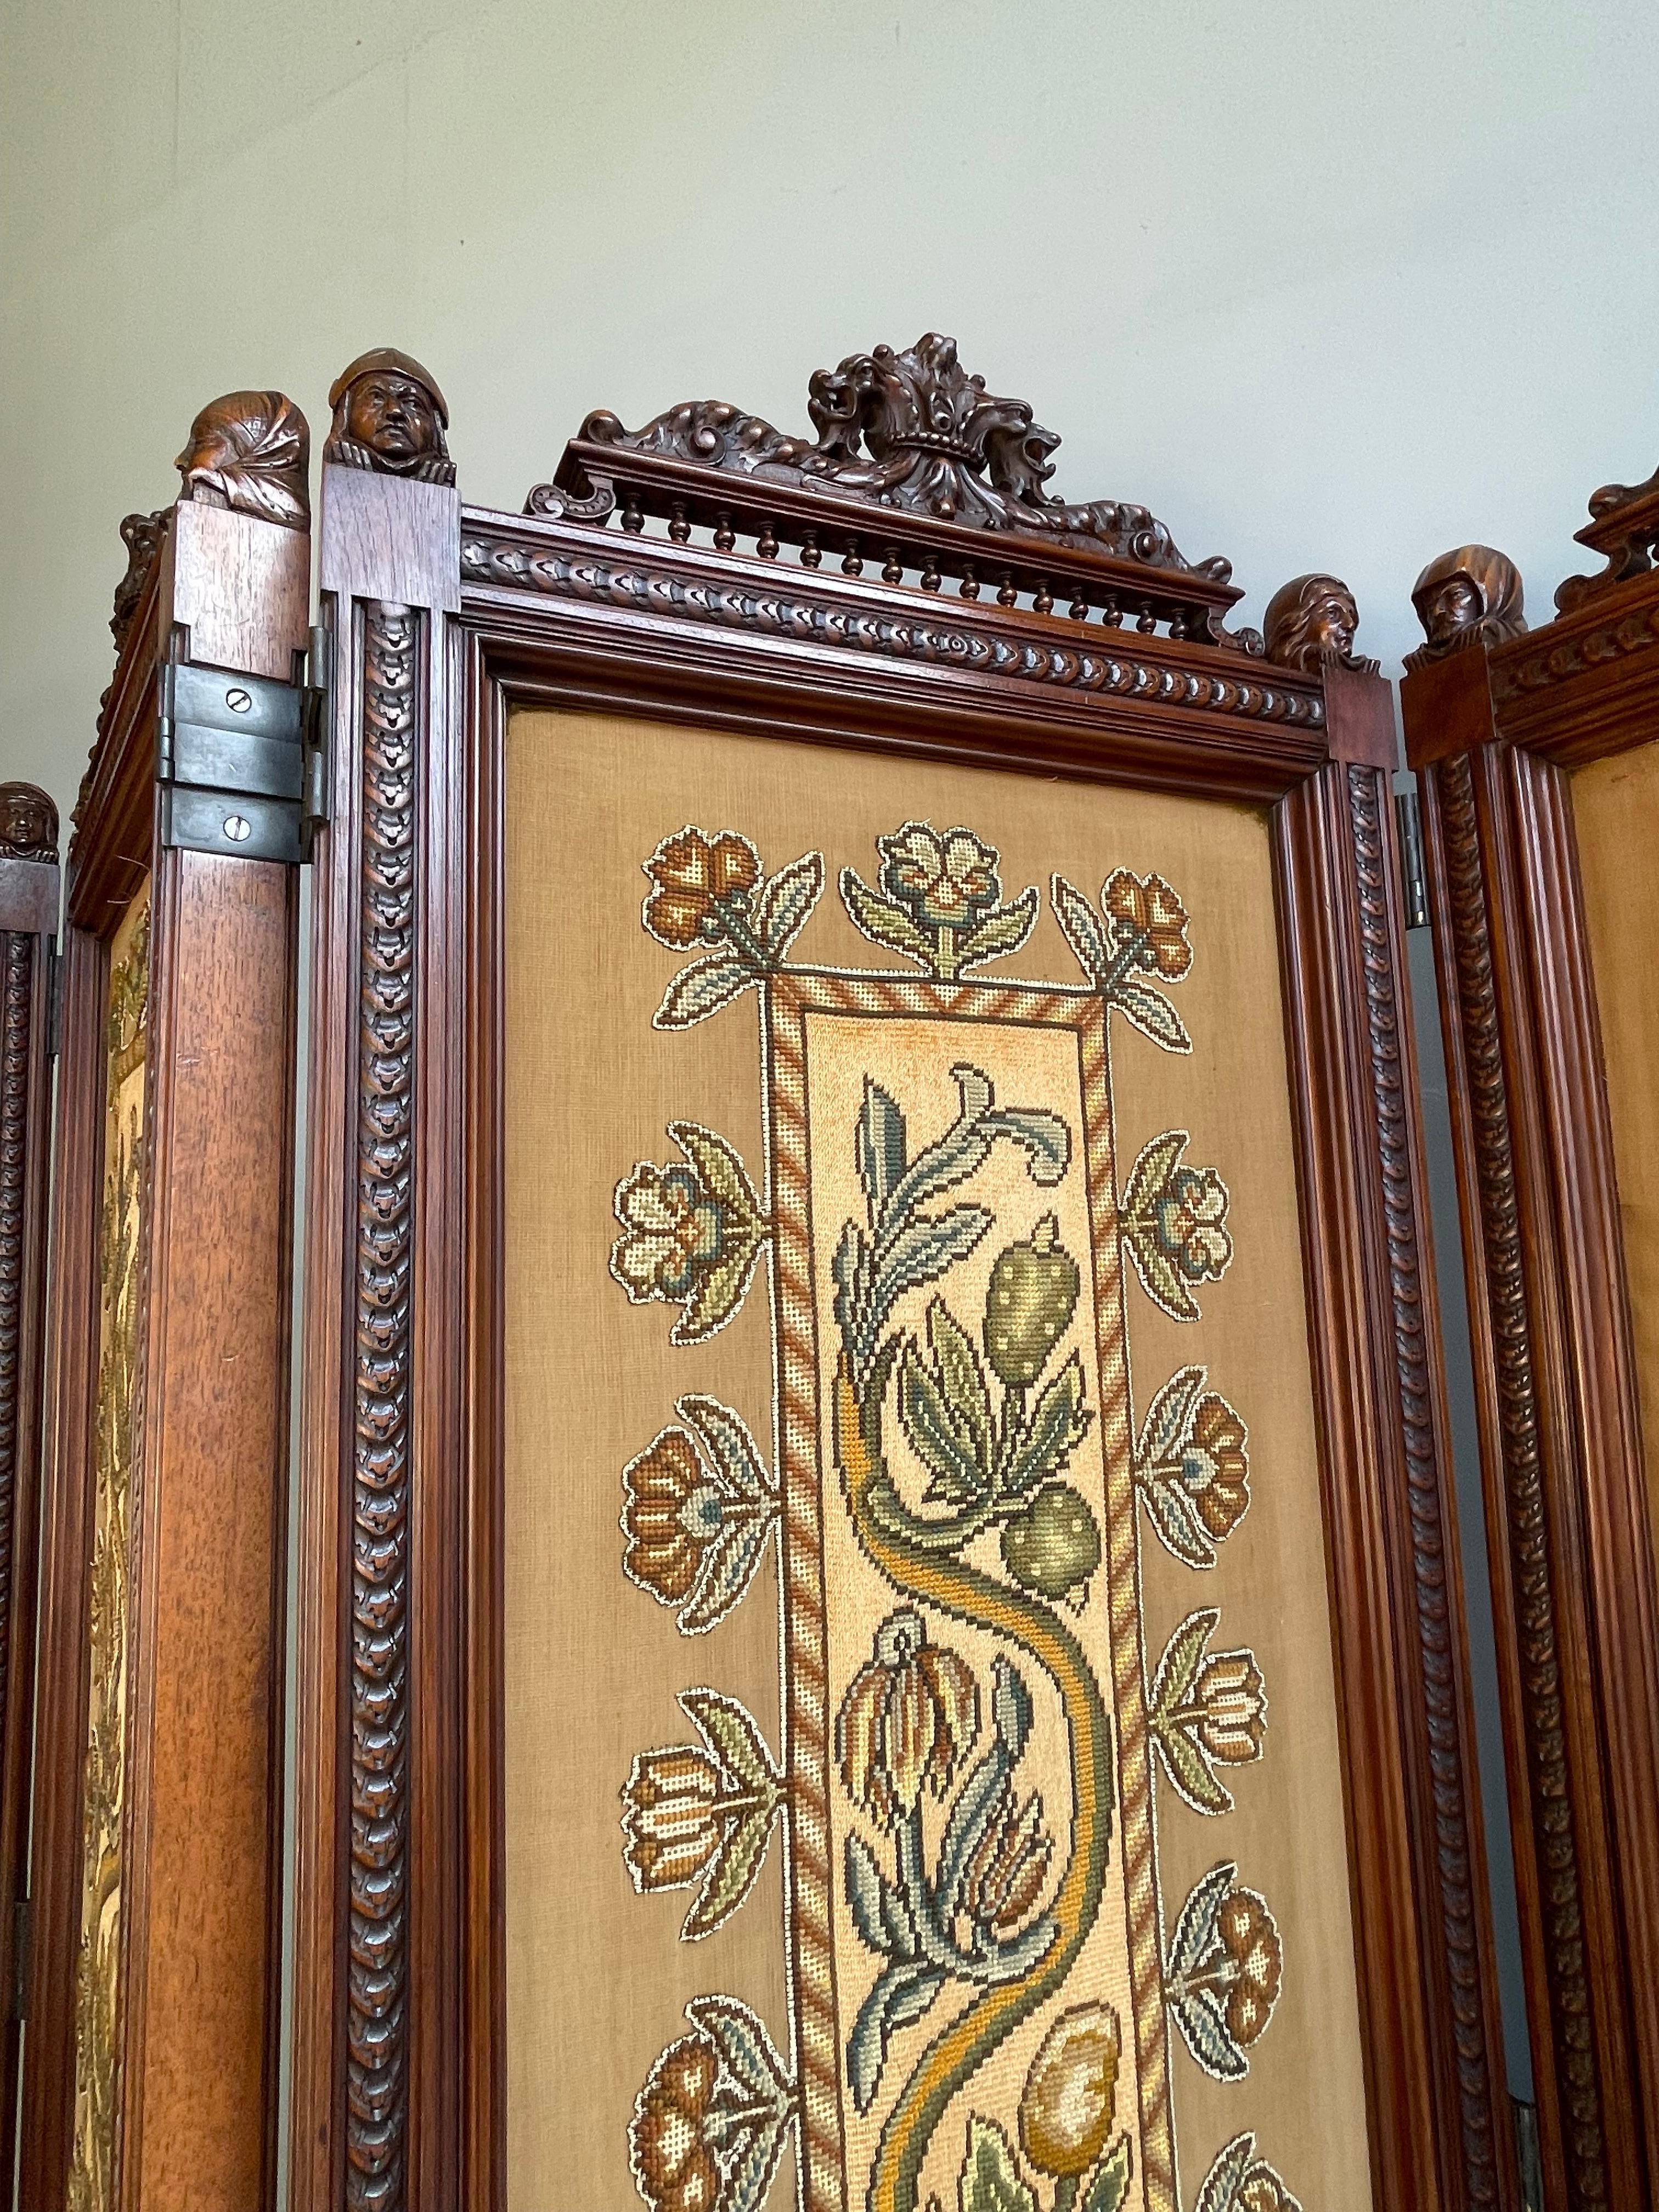 Hand-Crafted Stunning Renaissance Revival Folding Screen w. Embroidery and 8 Bust Sculptures